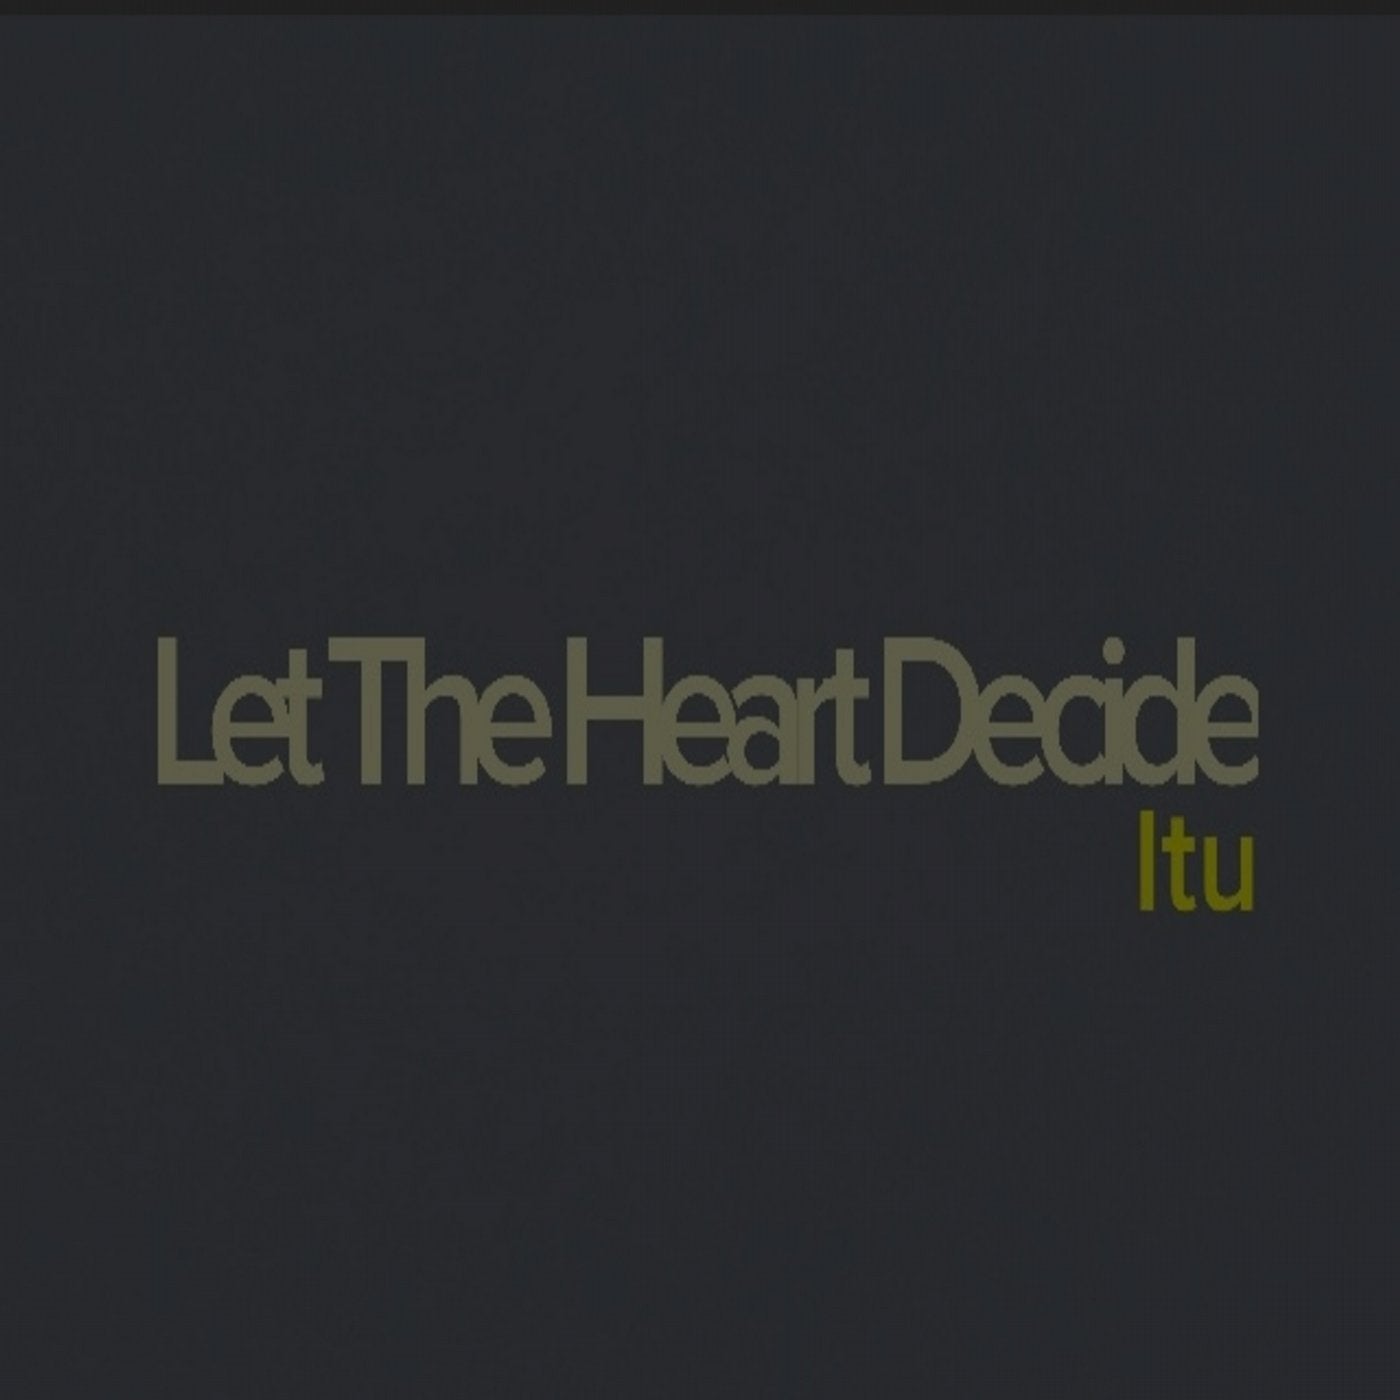 Let the Heart Decide